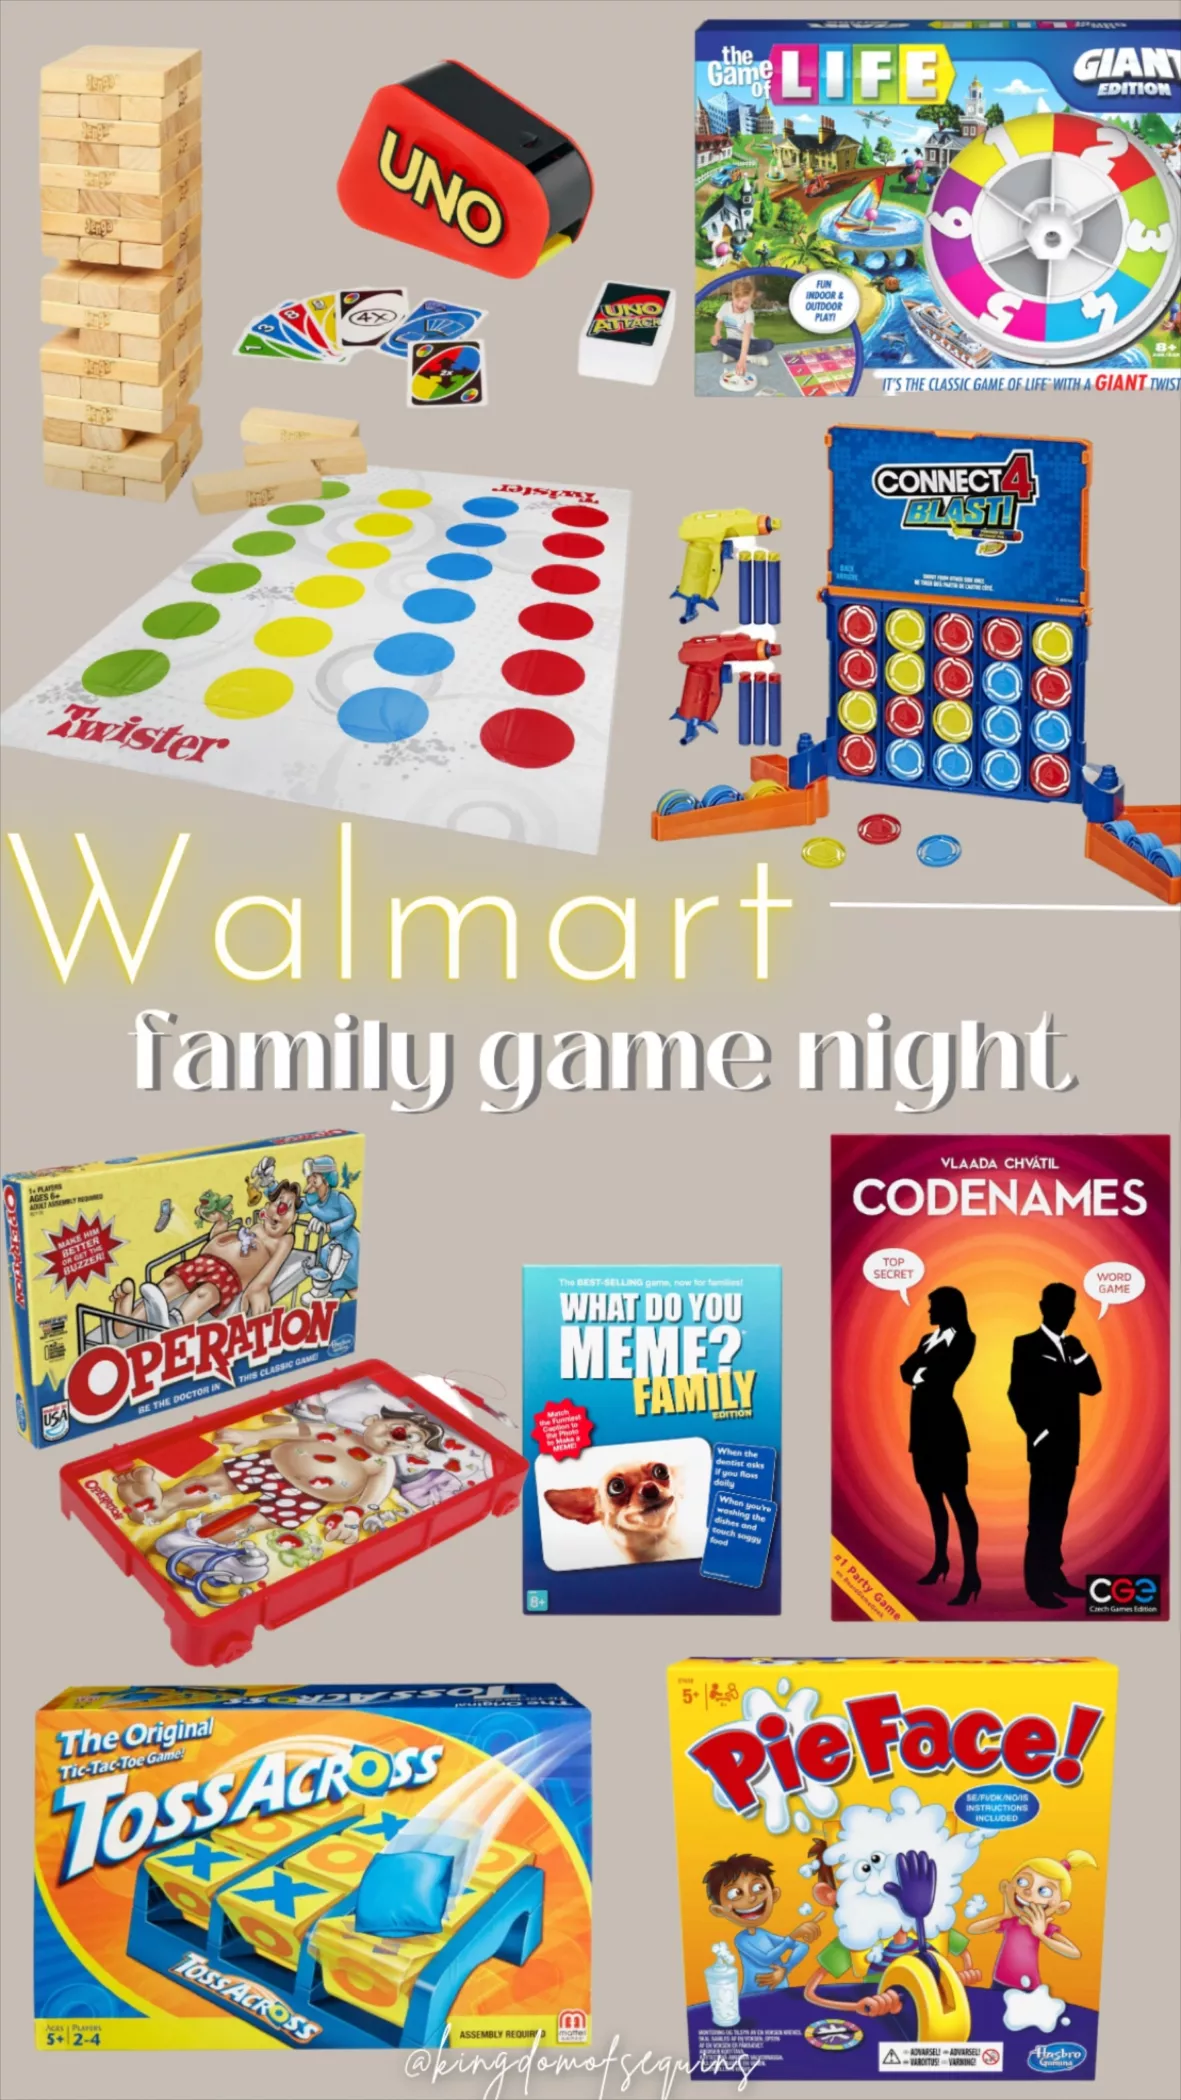 What Do You Meme? Family Edition Board Game on